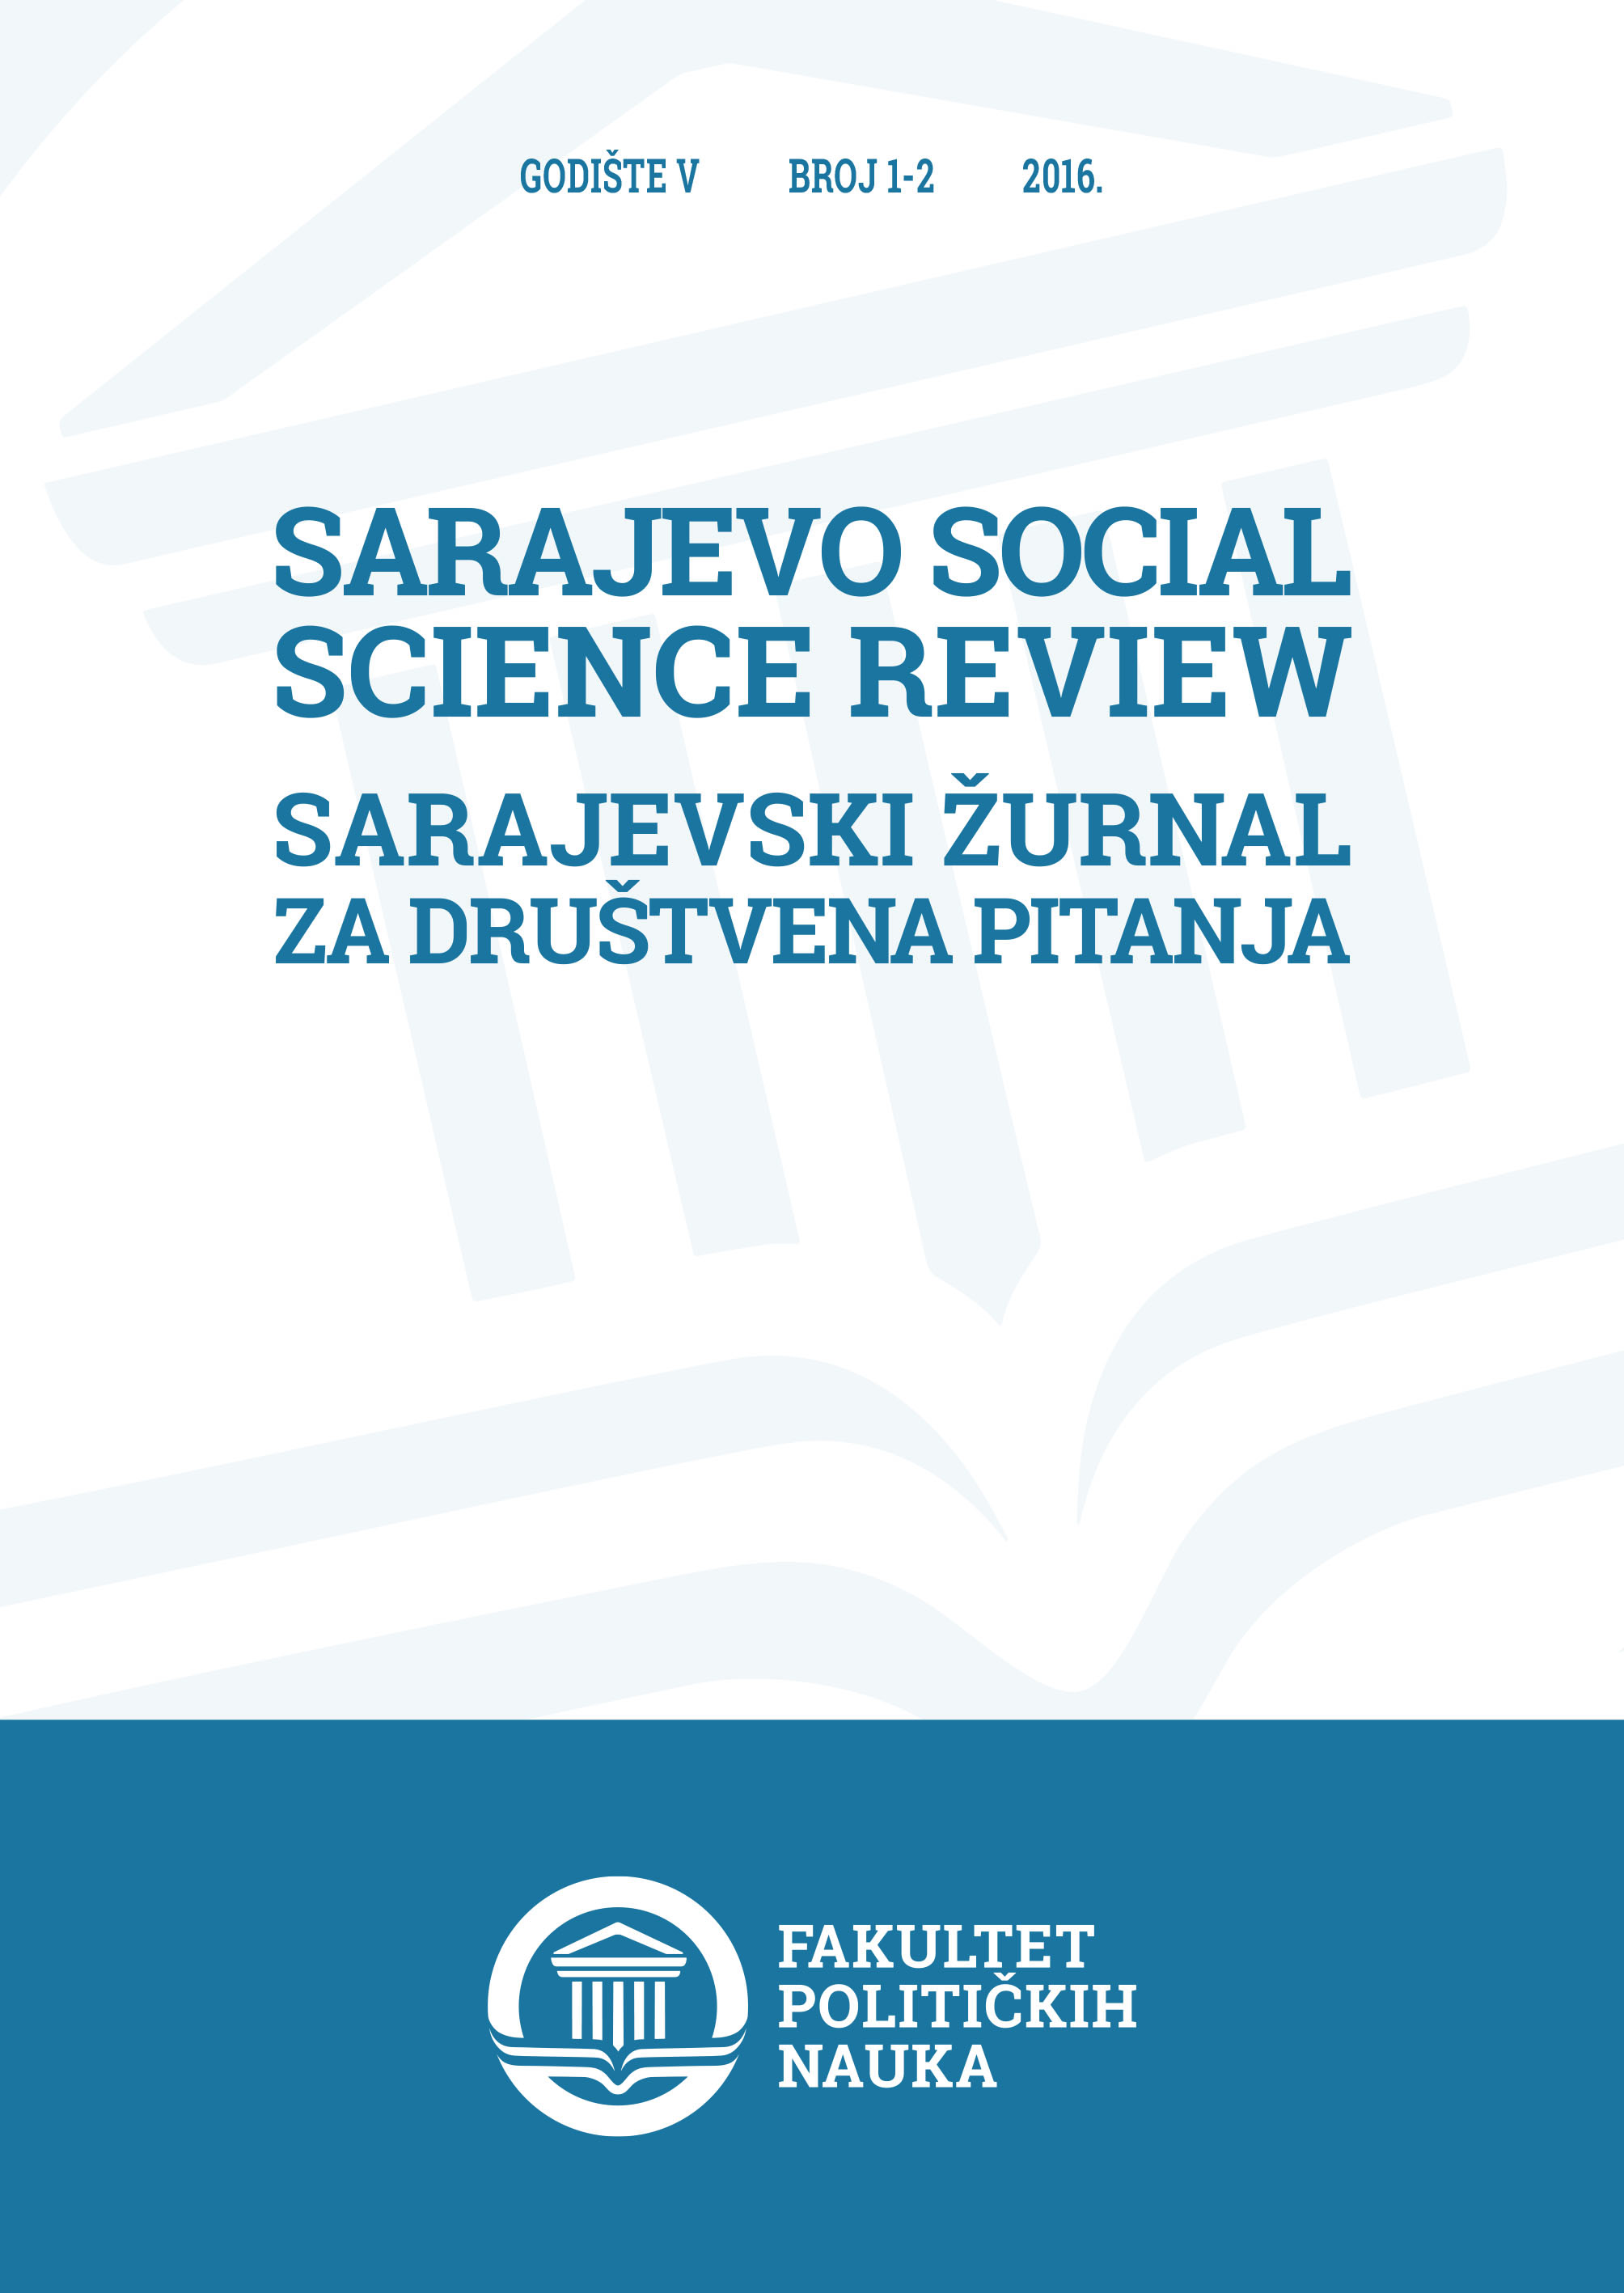 Public Media Services in Serbia and the (Lack of) Exercise of Public Interest Cover Image